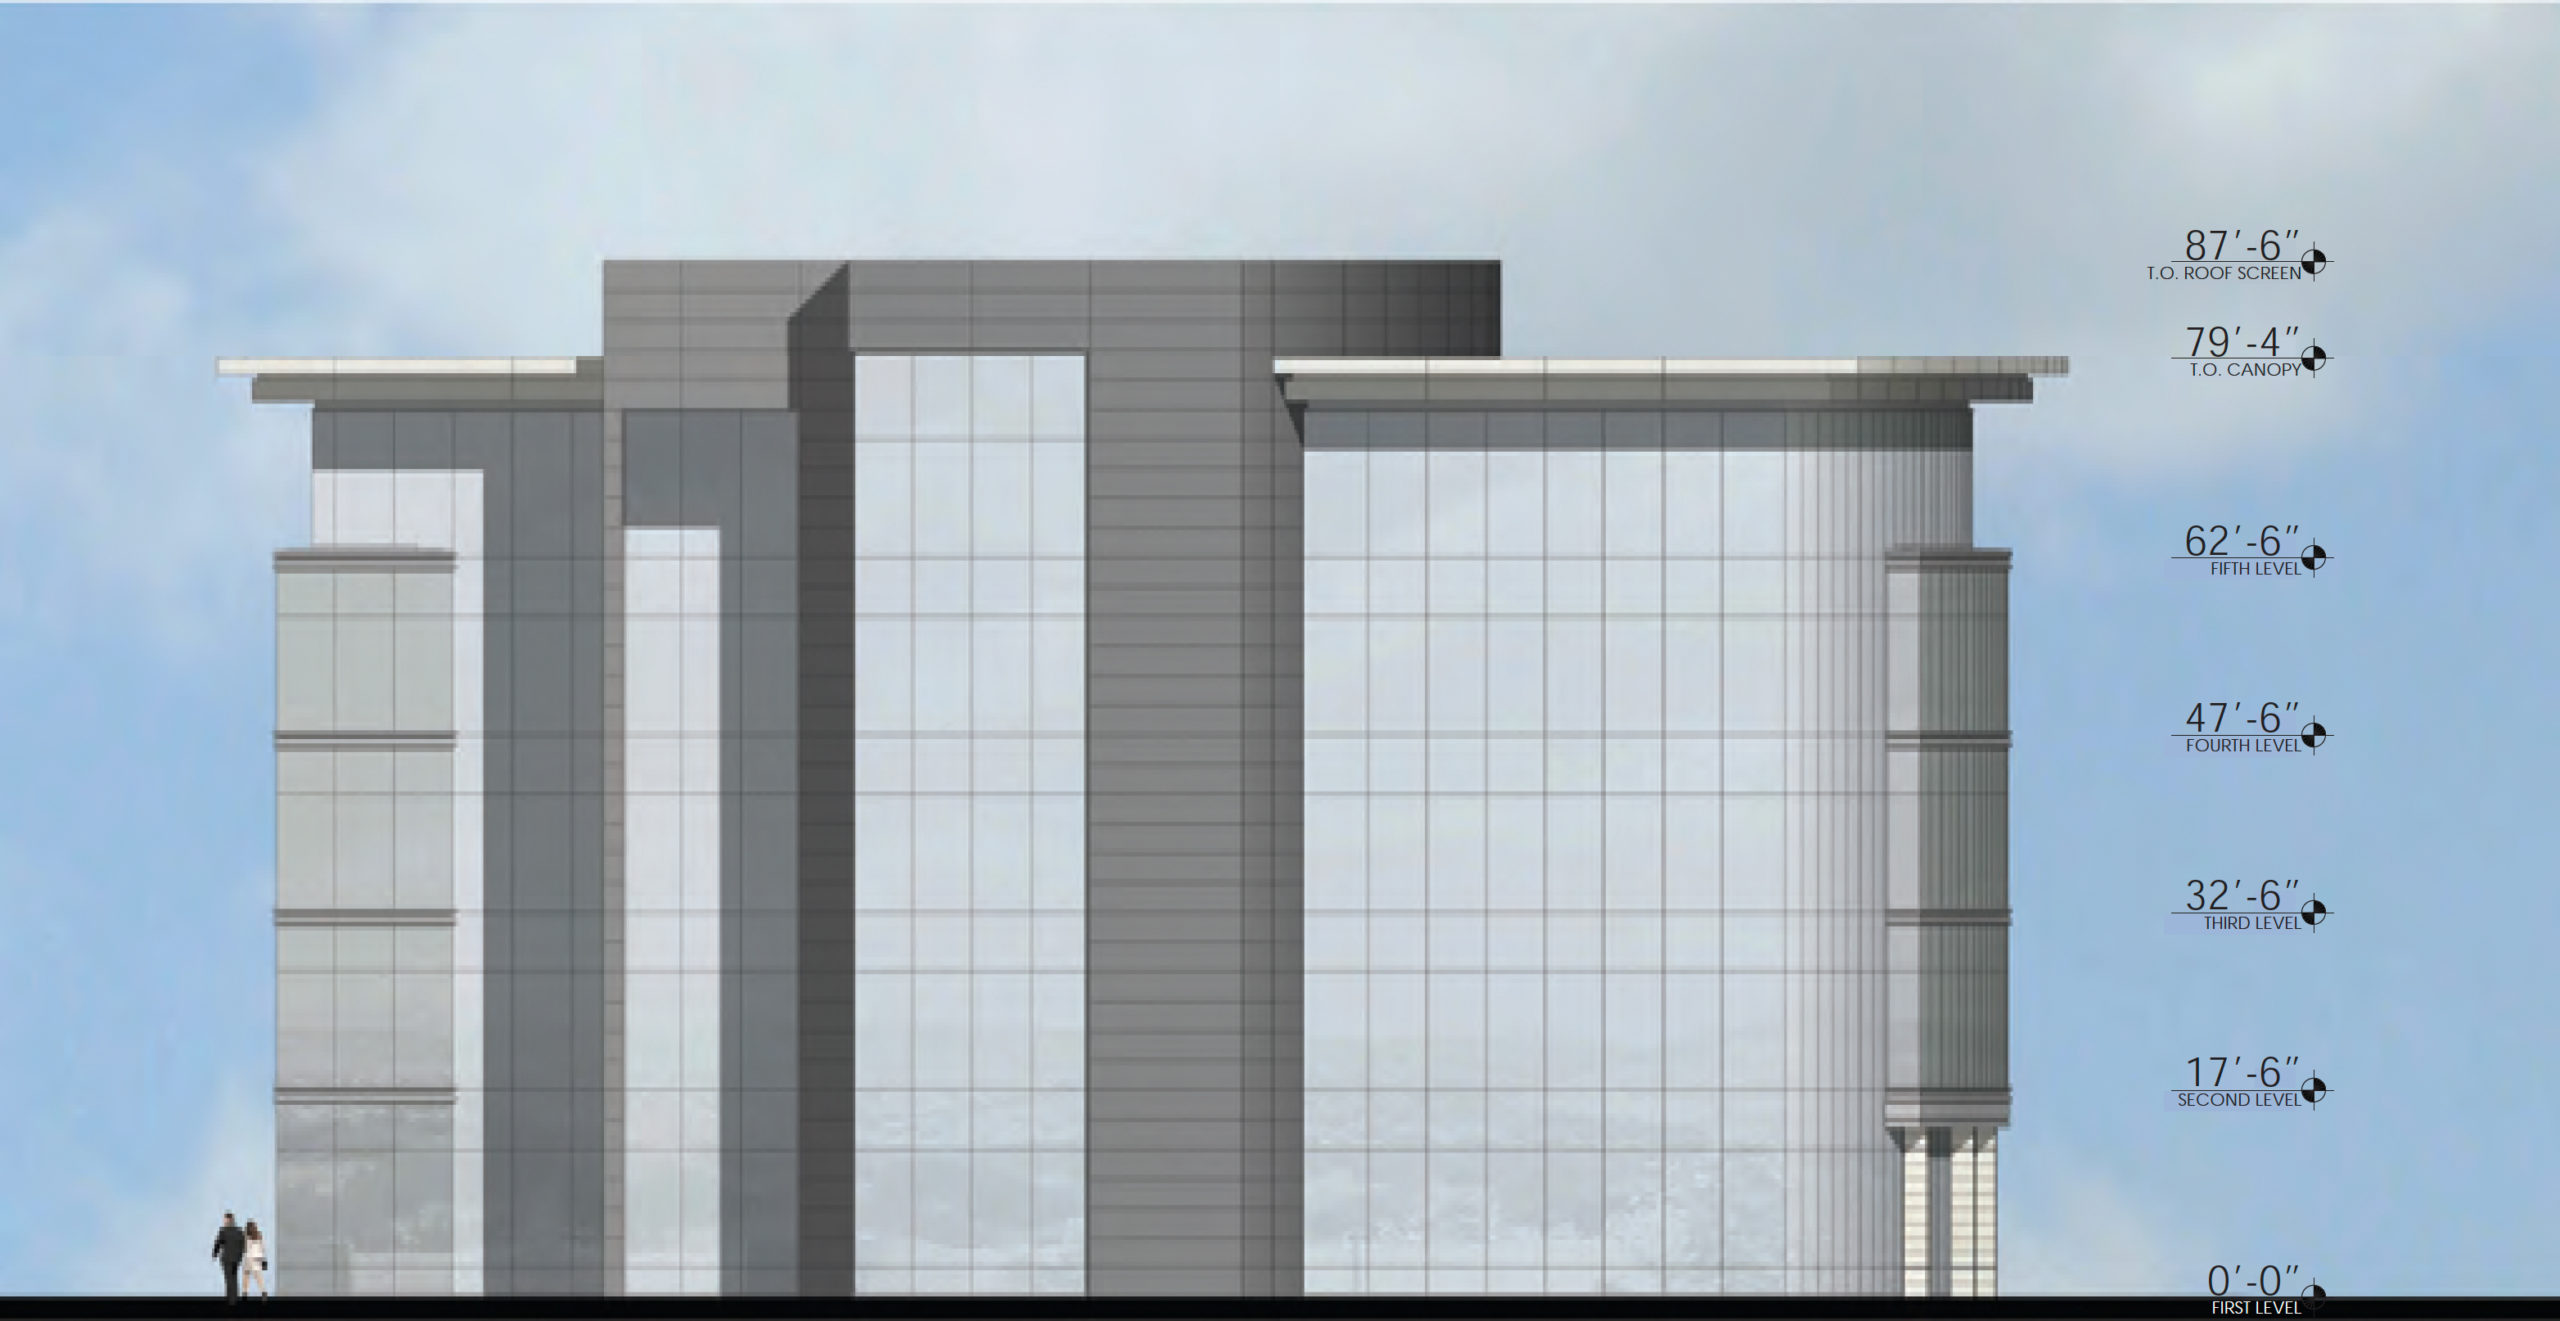 3000 Bowers Avenue elevation, rendering by Architectural Technologies